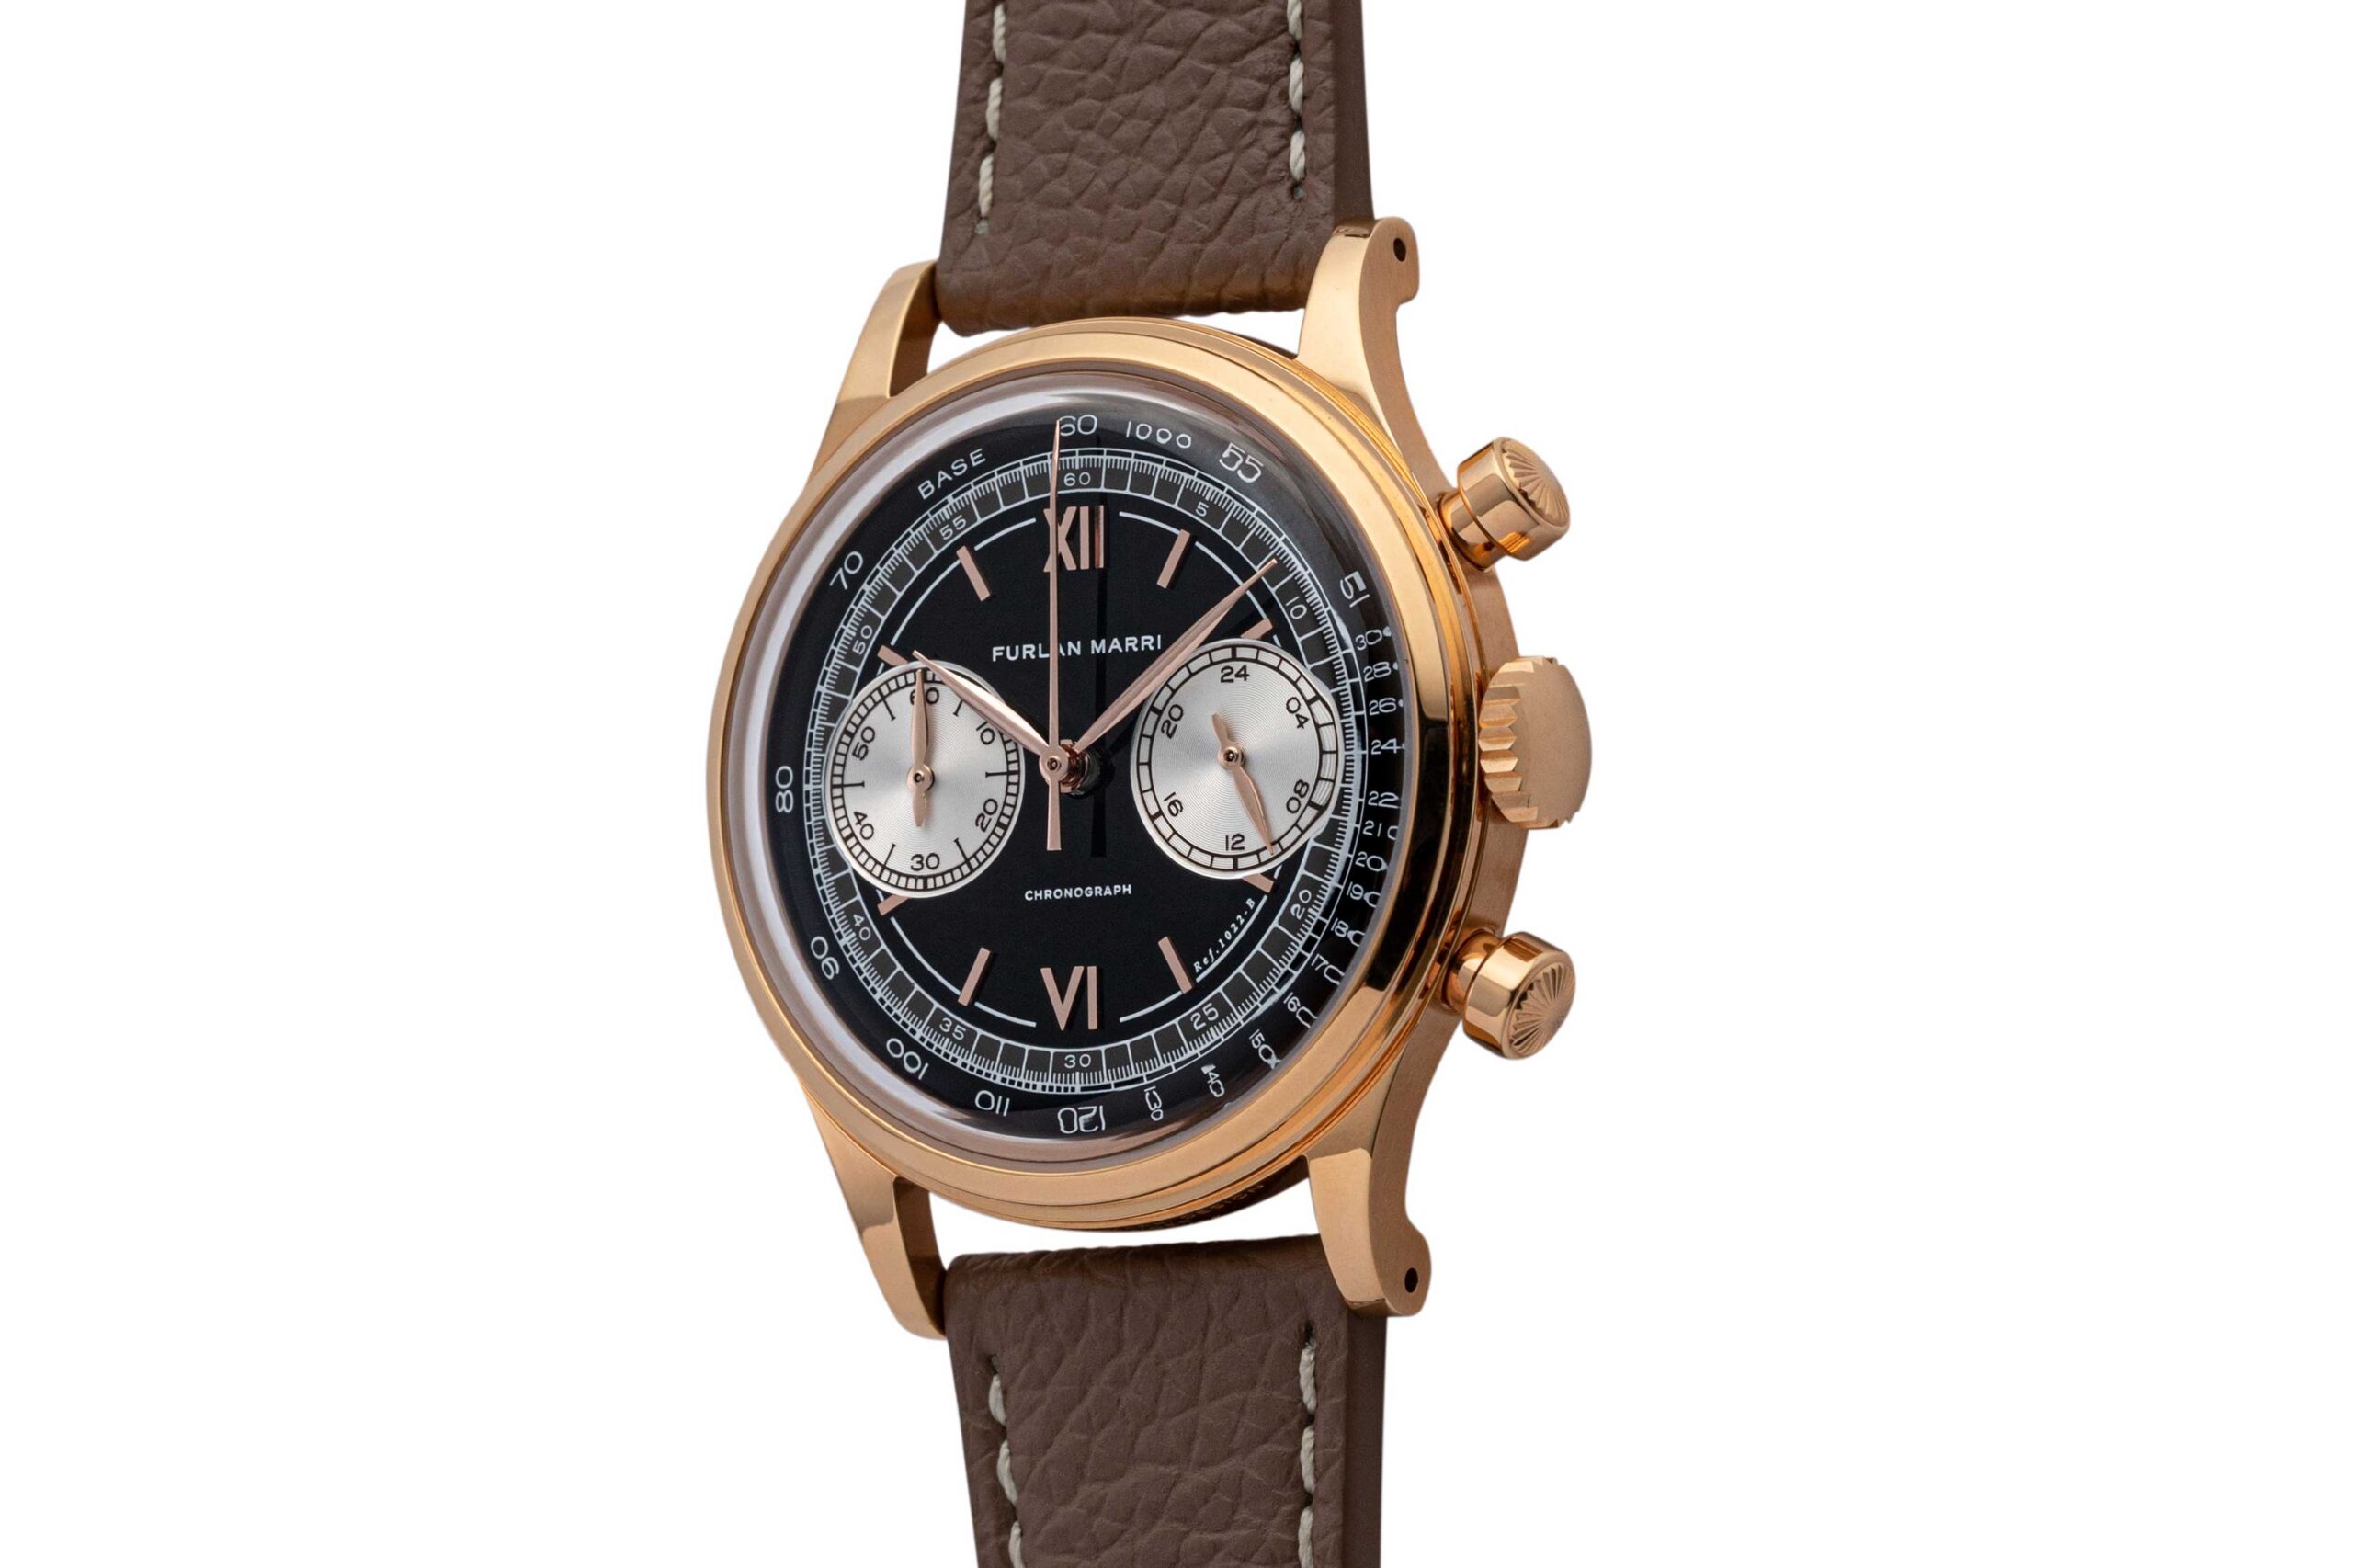 Check out how the crown and pushers are in the same styling at the François Borgel case of the Patek Philippe Chronograph ref. 1463 (©Revolution)